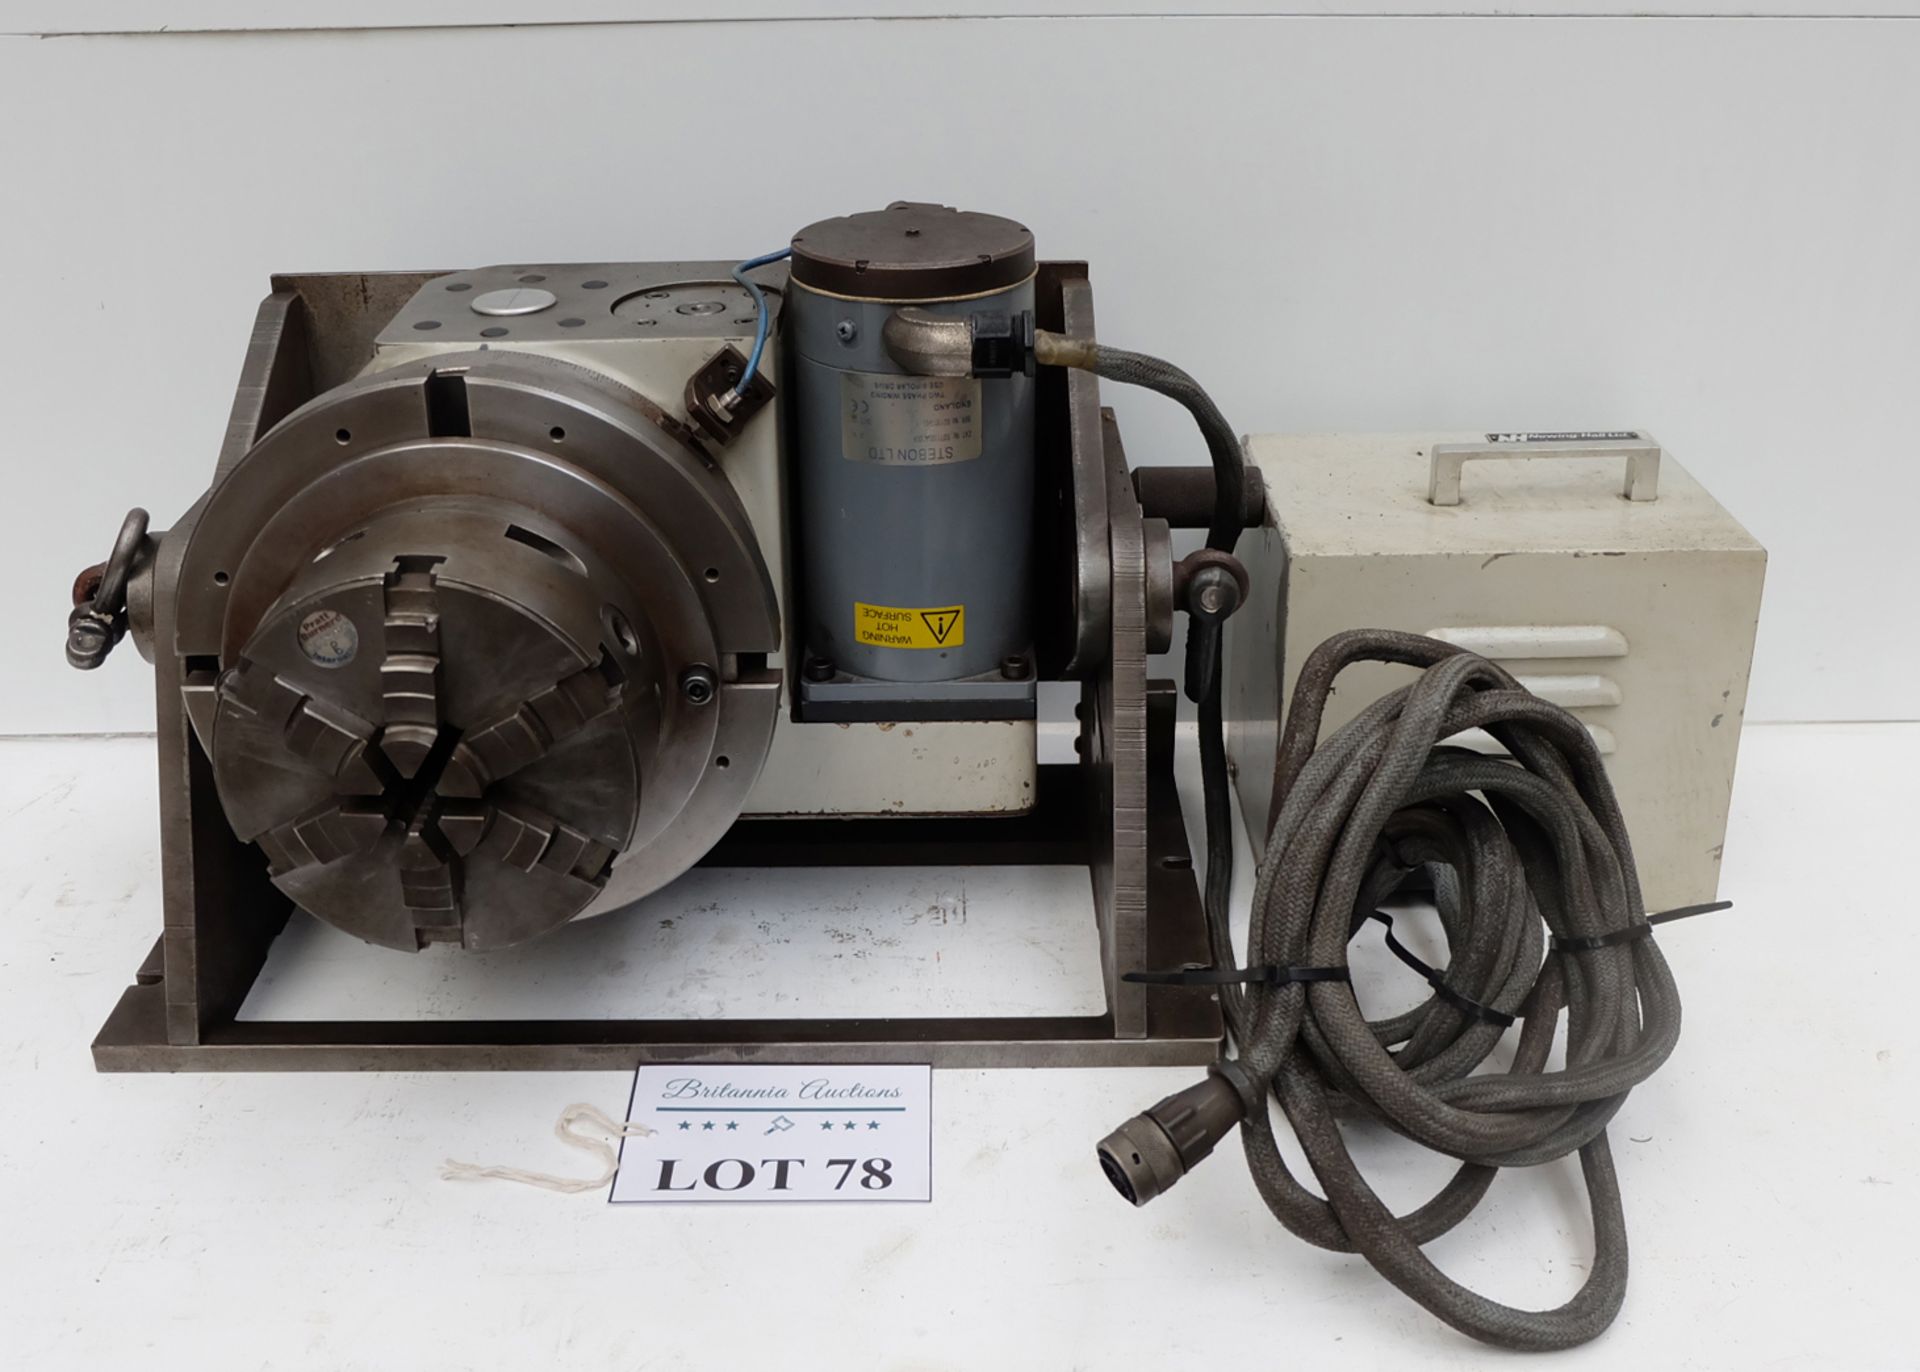 Jones & Shipman Type 58413-001. 8" 4th Axis Tilting & Swivelling Dividing Head. With 6" 5 Jaw Chuck.